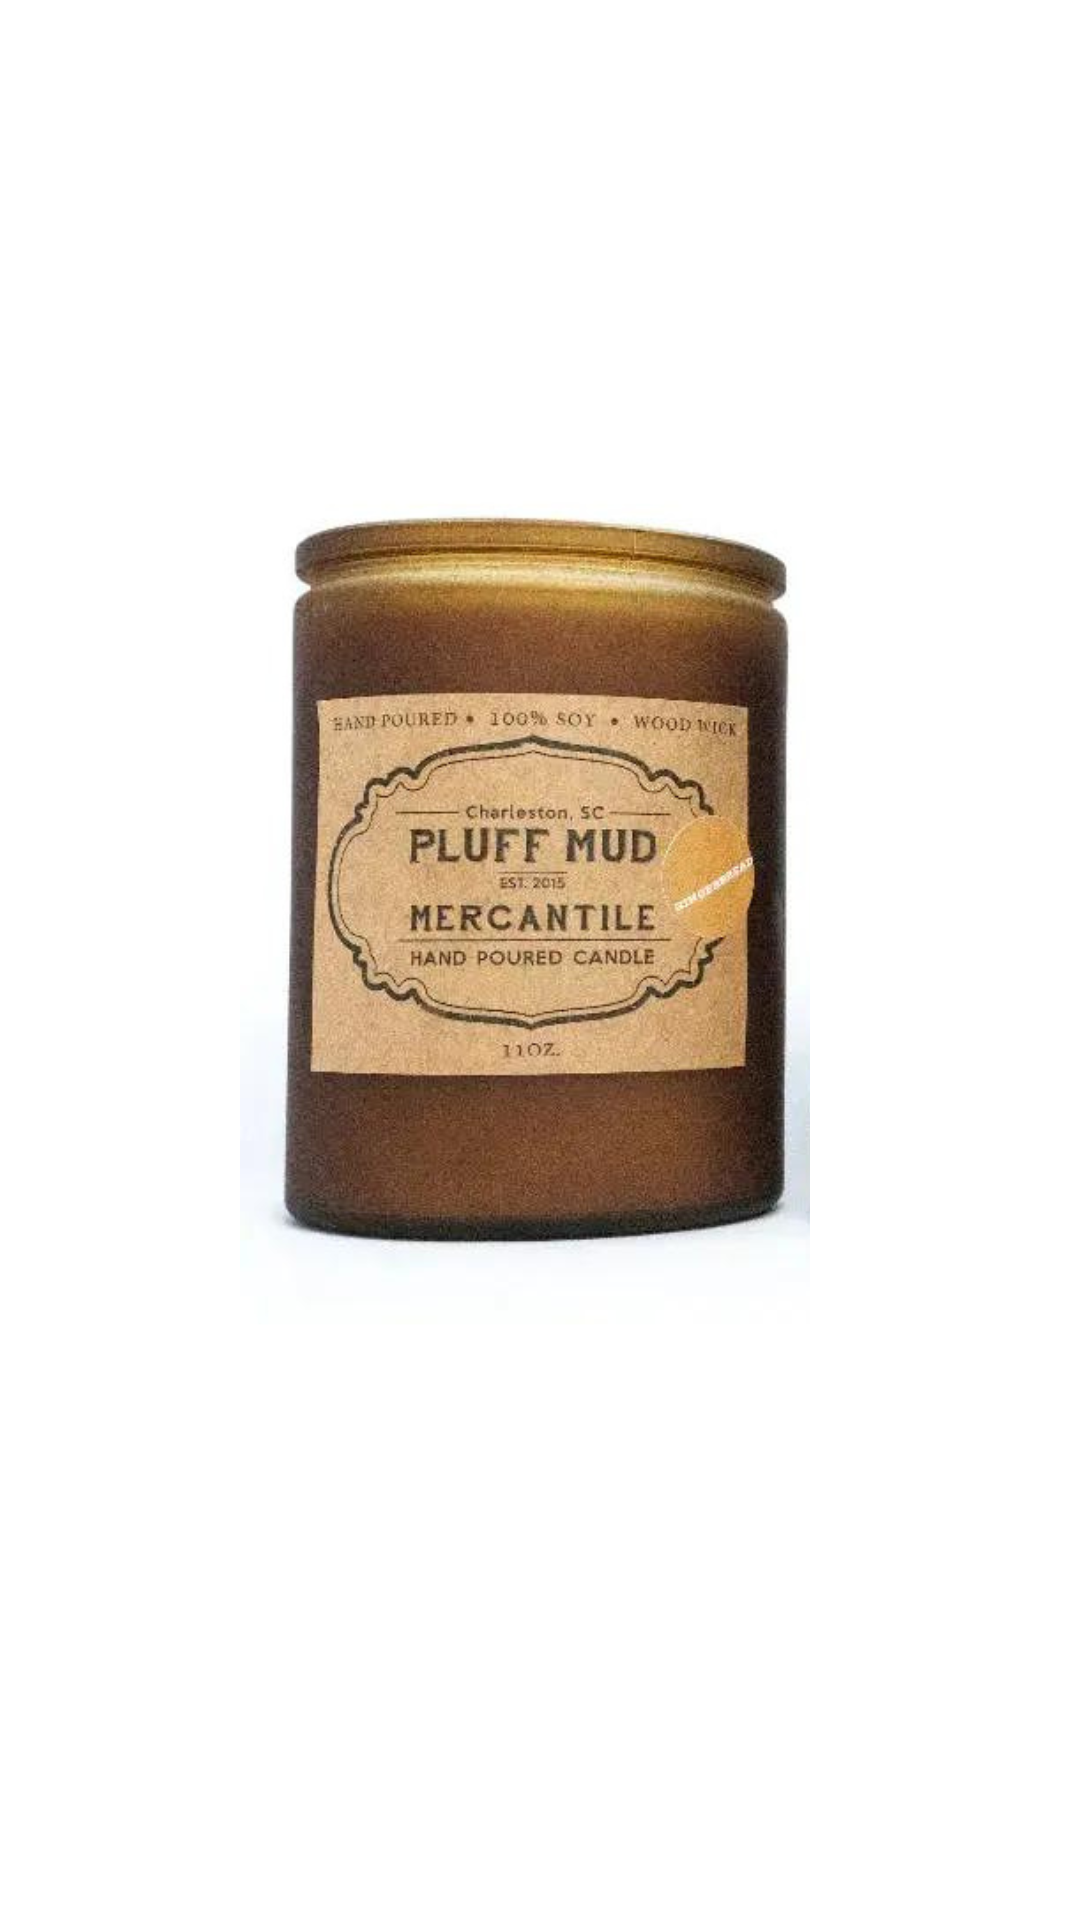 Clean Linen Hand Poured Soy Candle - Pluff Mud Mercantile